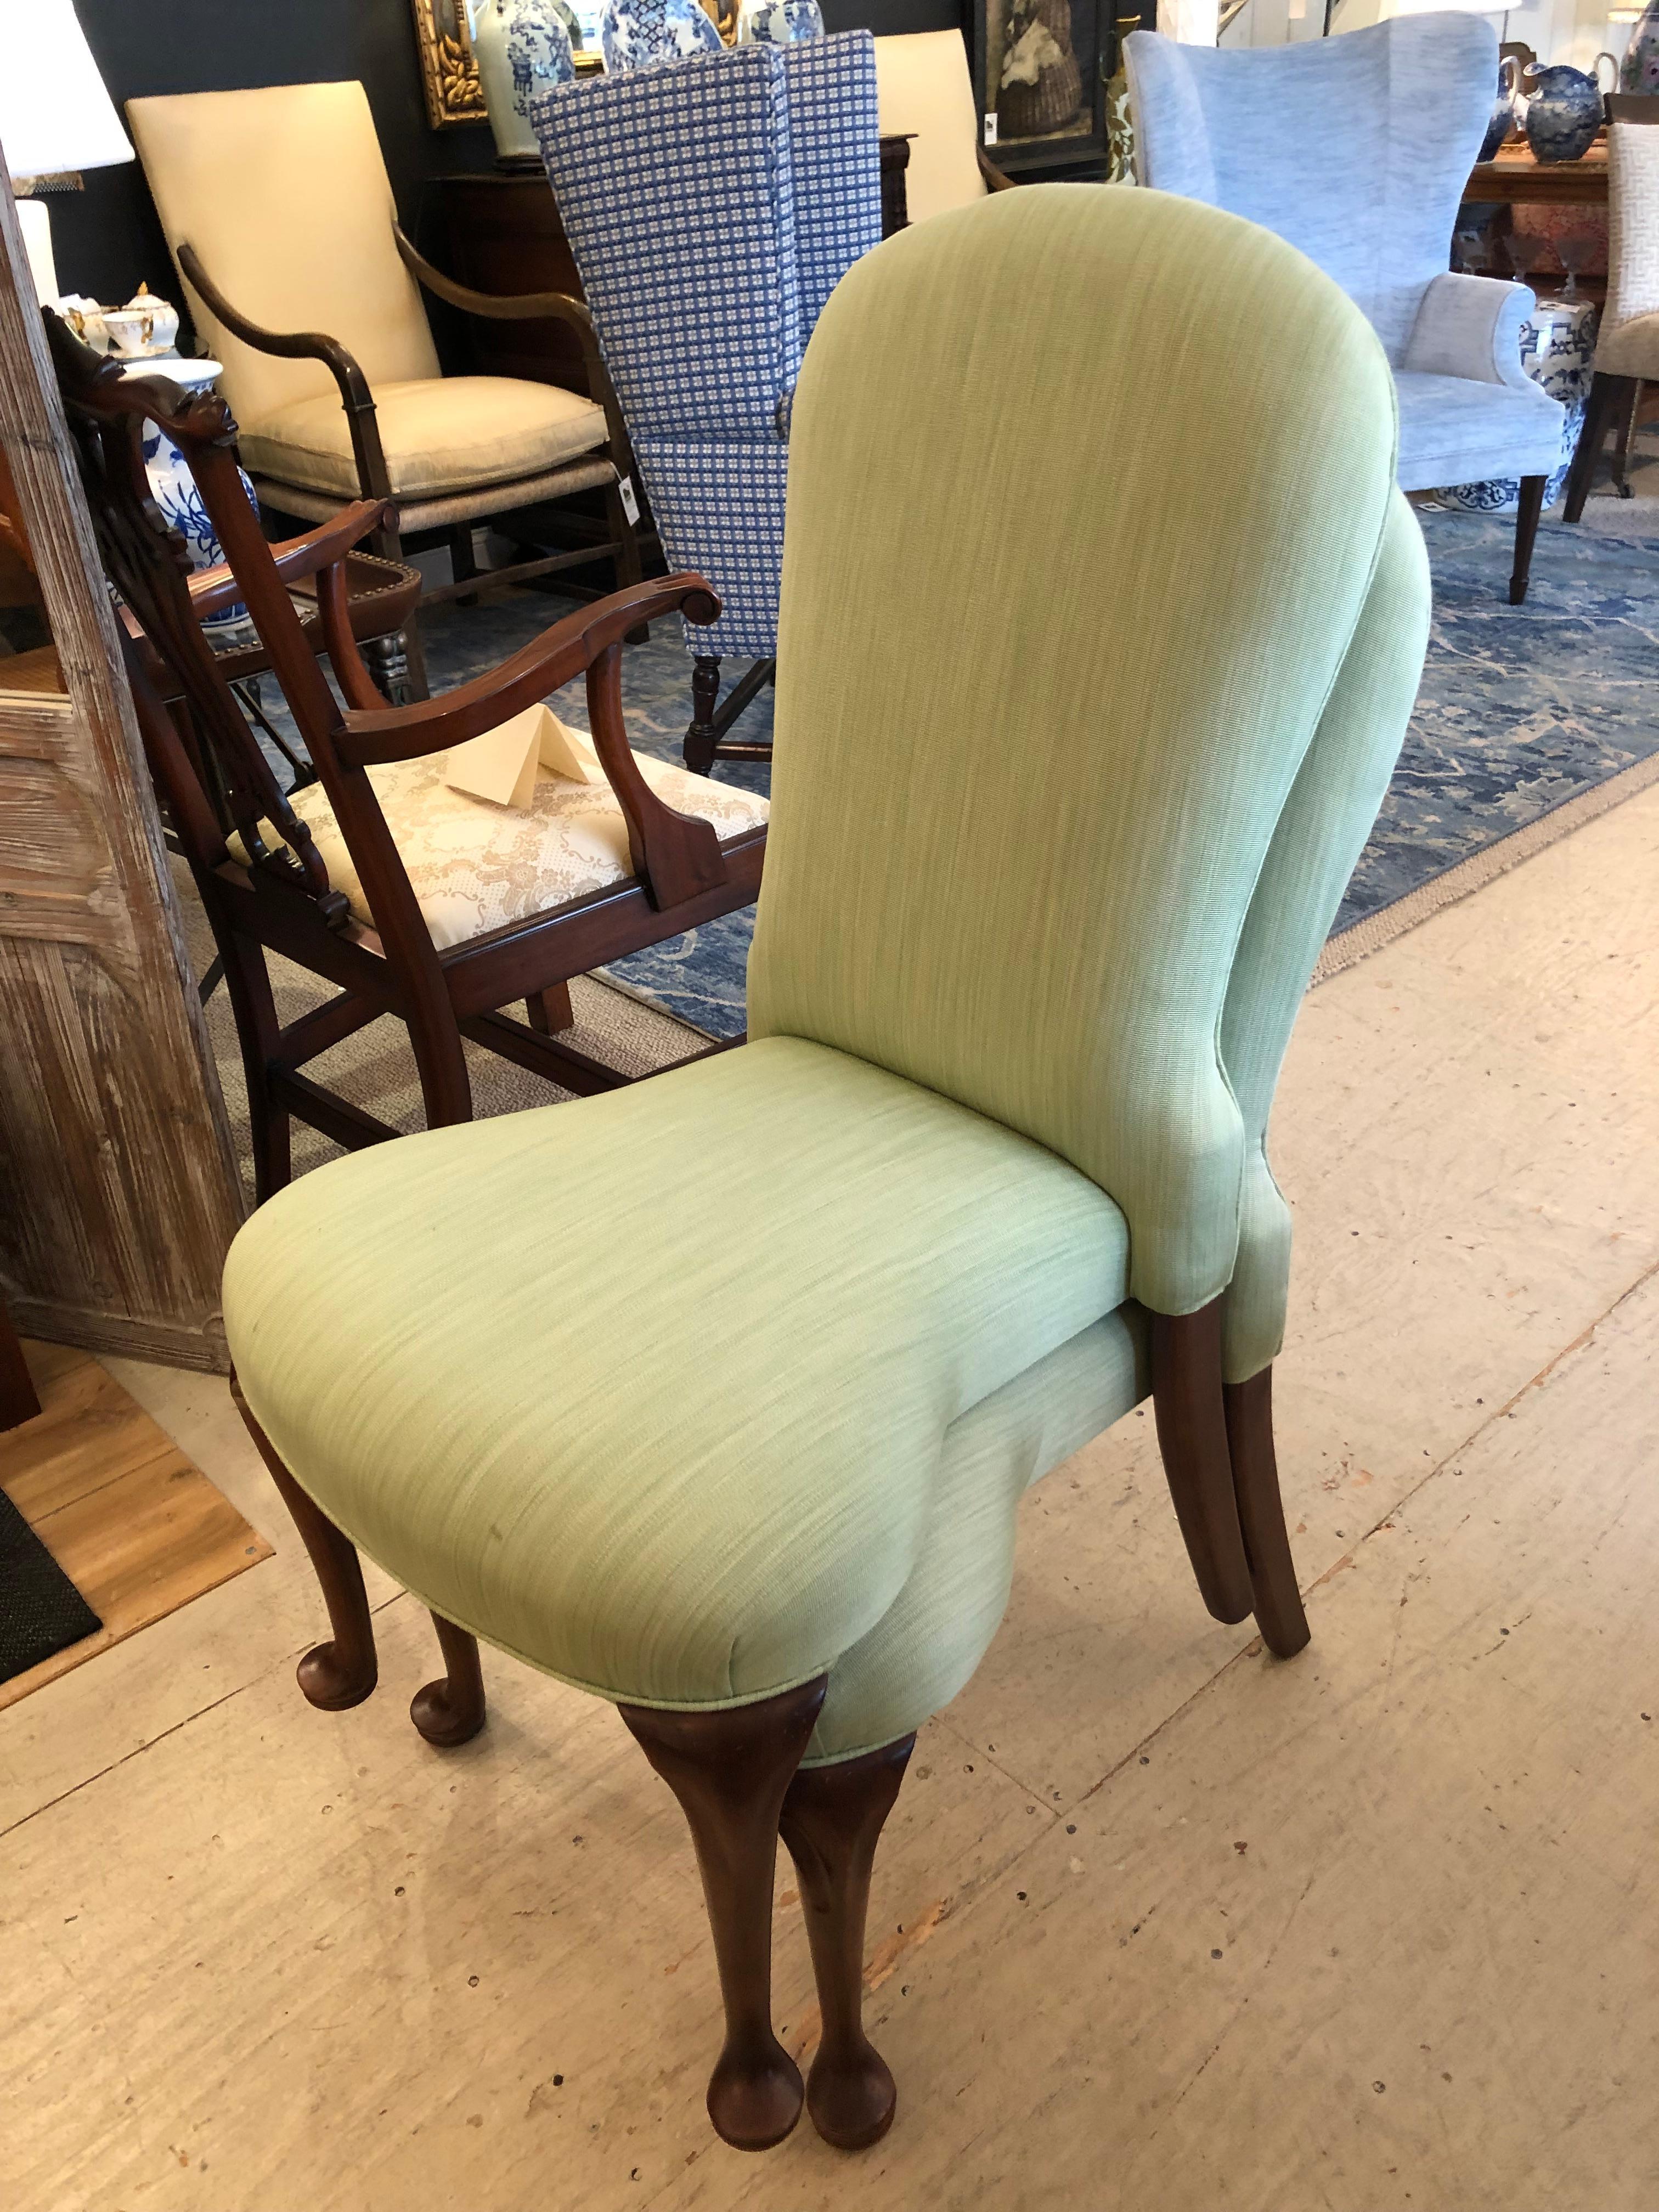 A superb pair of vintage French side chairs with exaggerated shapely seats and backs and dark wood cabriole legs.  A wonderful asset:  they are stackable for easy storage.  